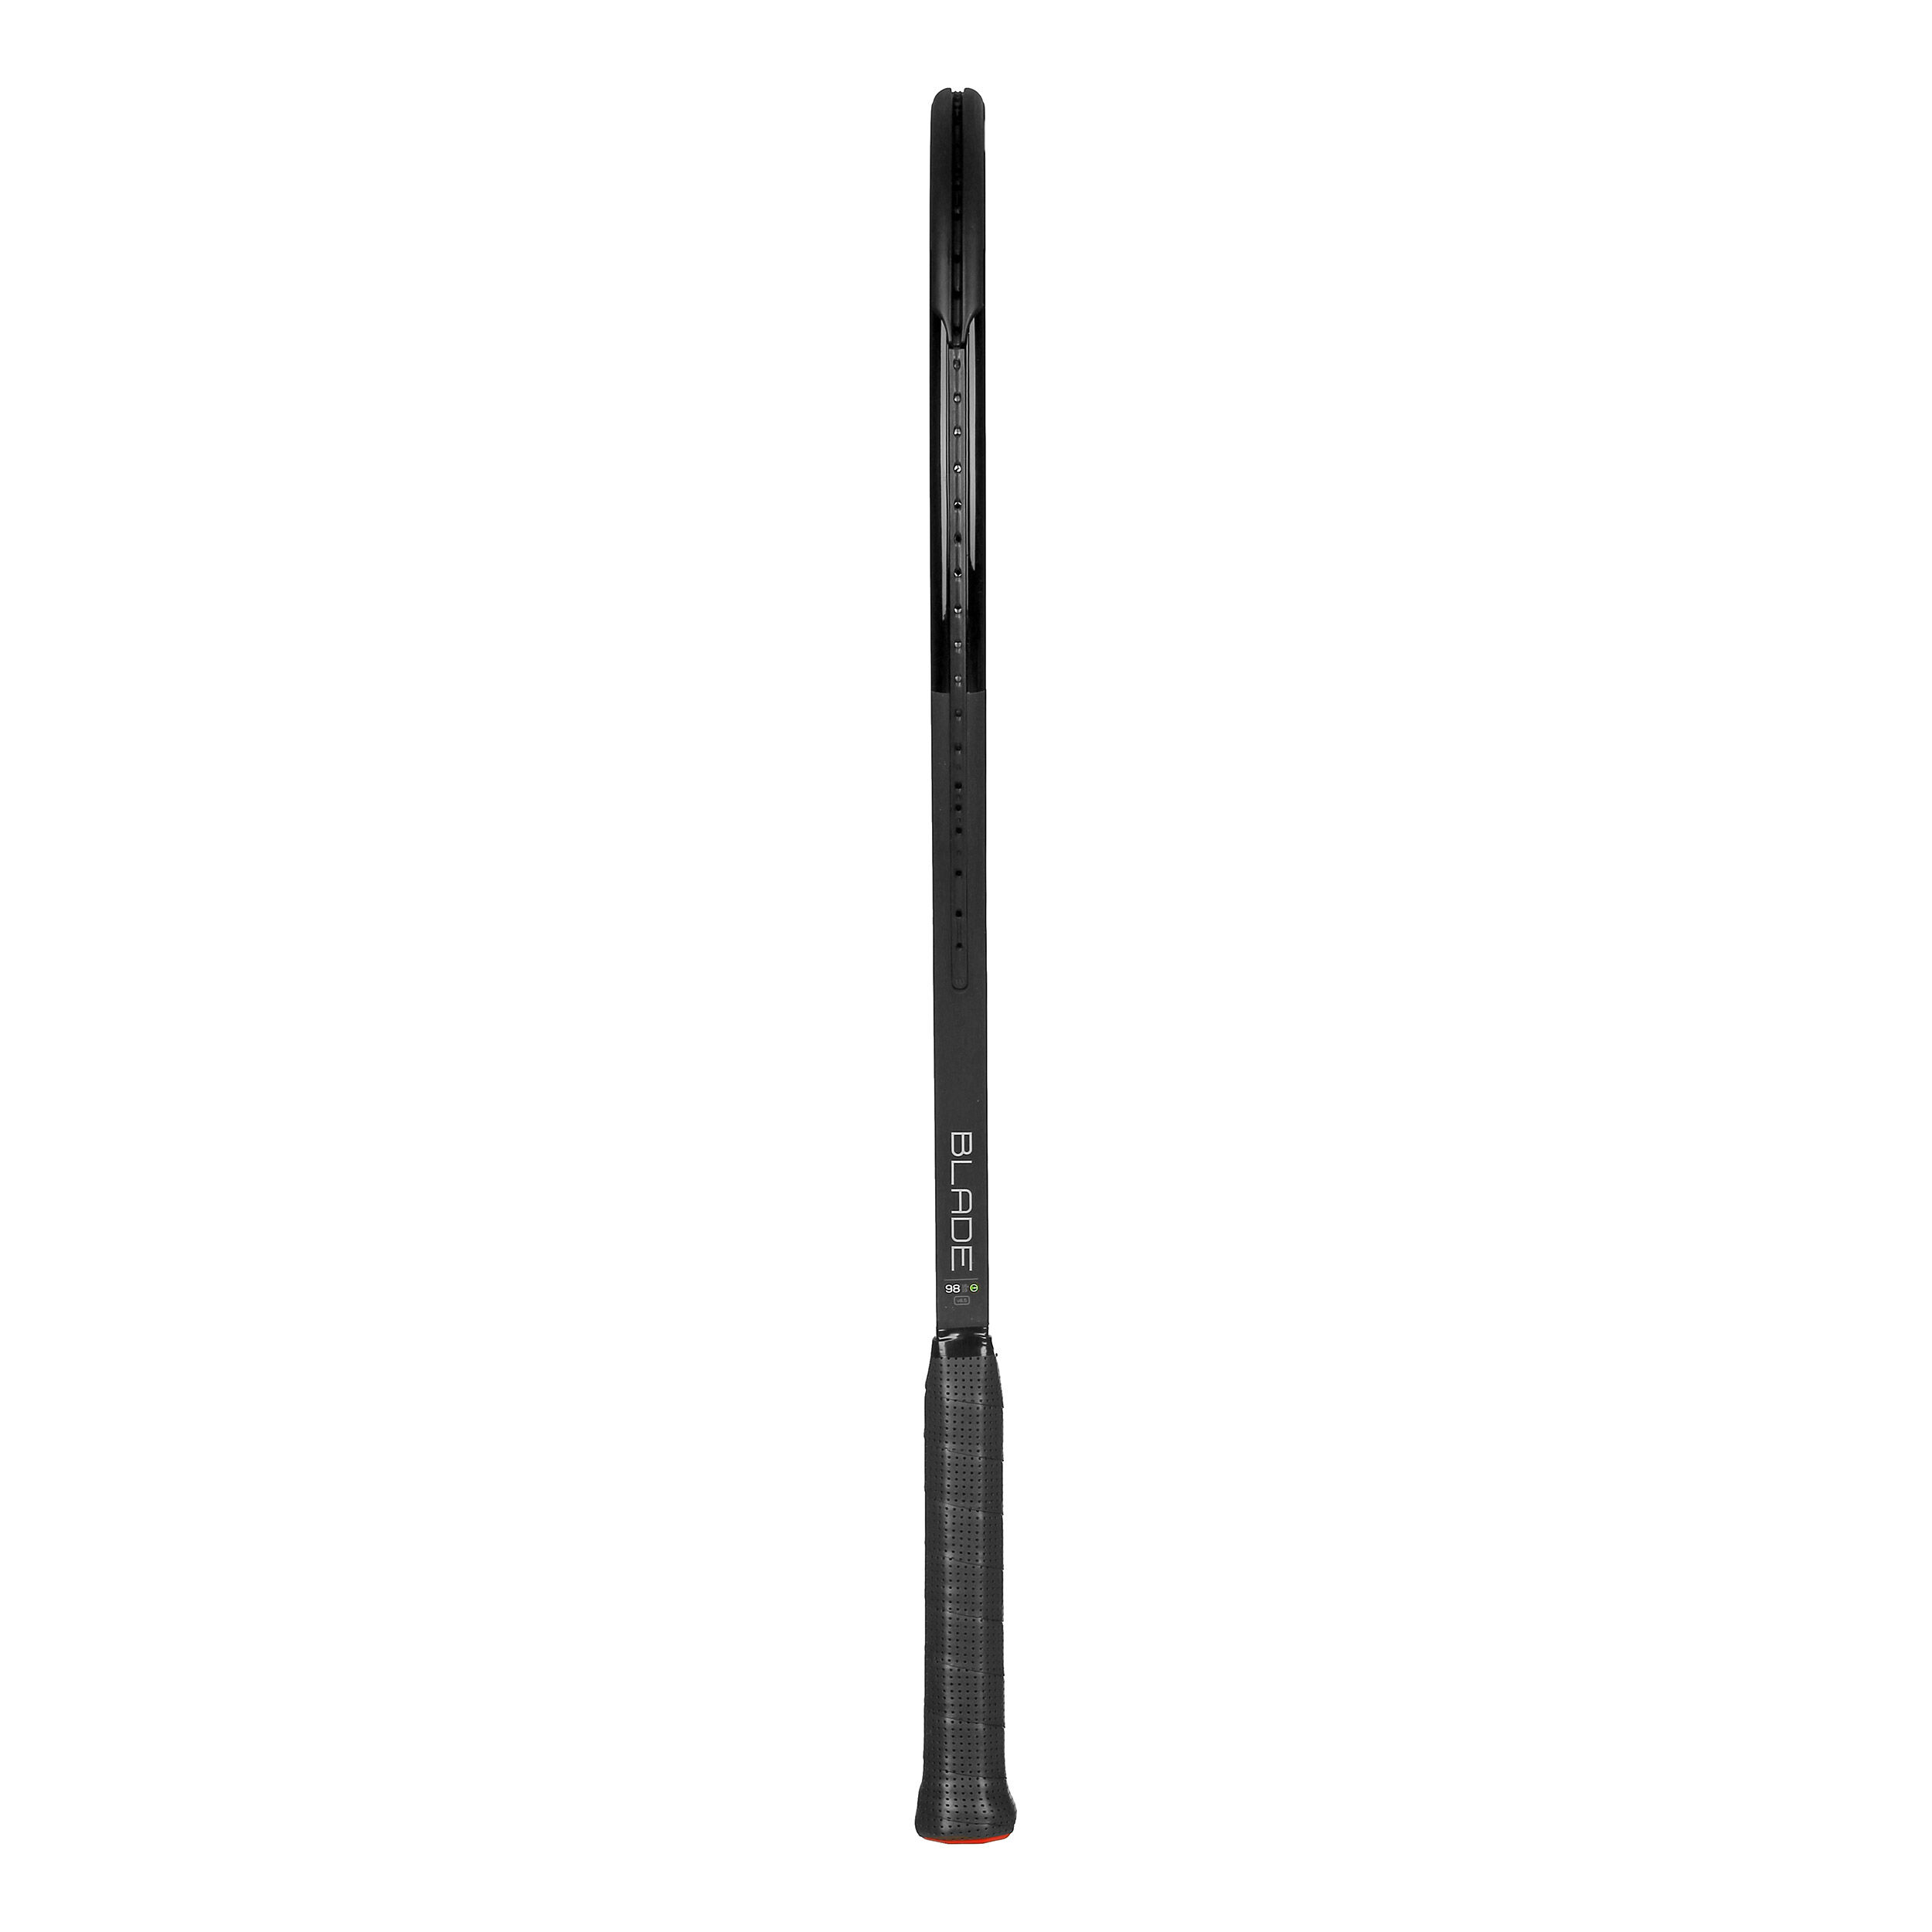 Buy Wilson Blade 98 16x19 Countervail Black (Special Edition